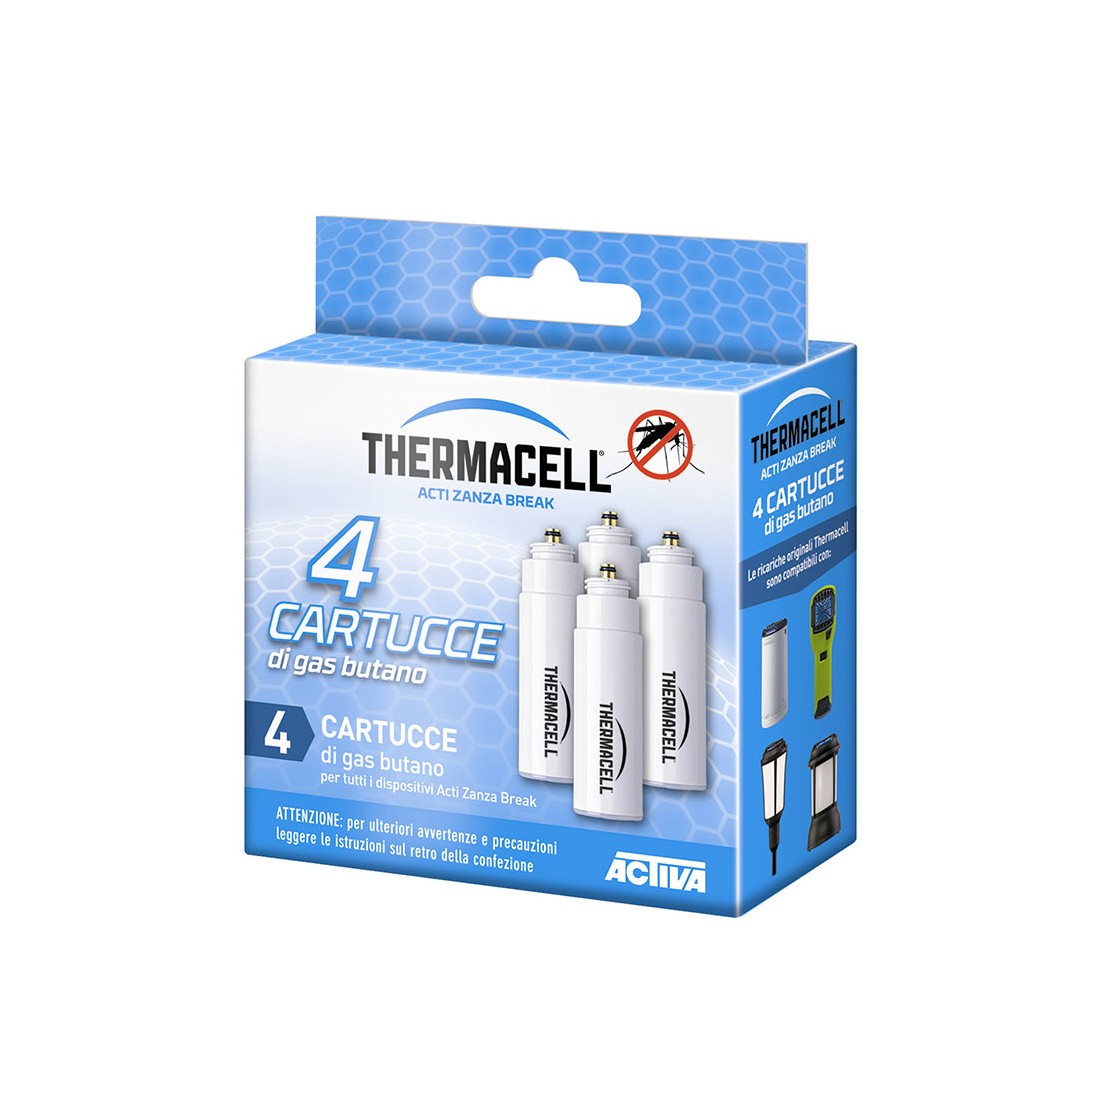 Thermacell ricarica 4 Cartucce gas butano